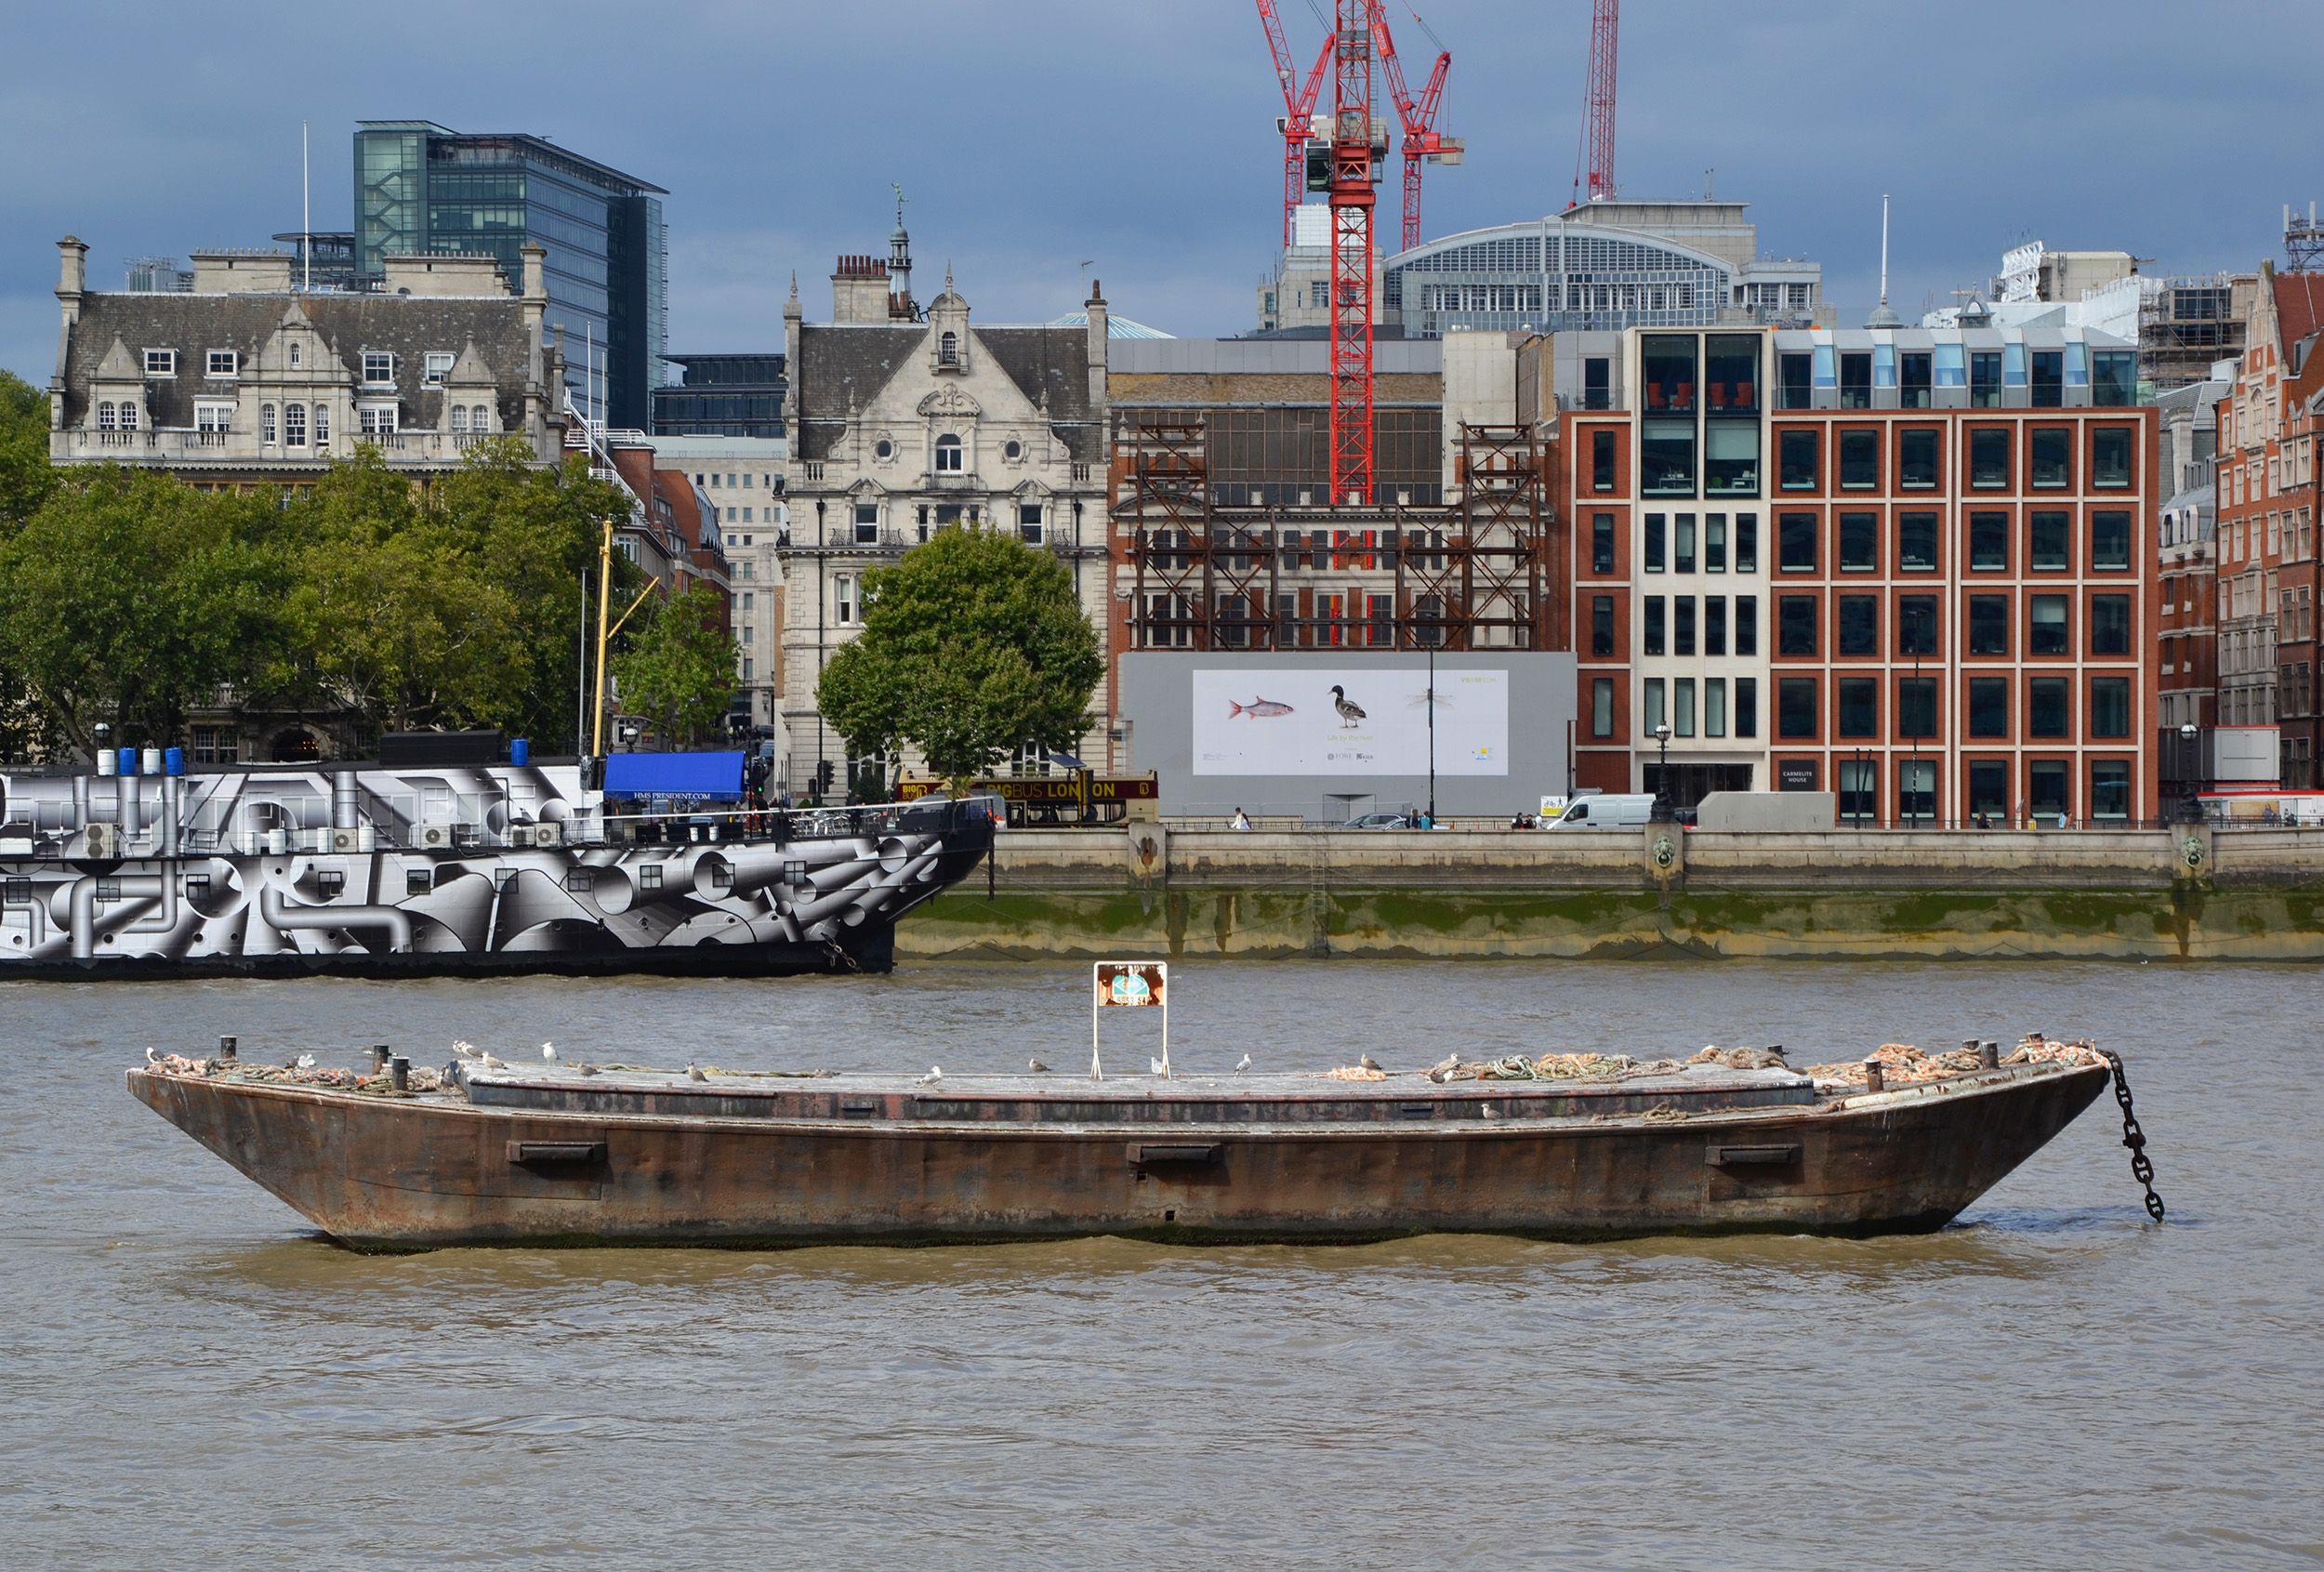 Boat in the river thames photo